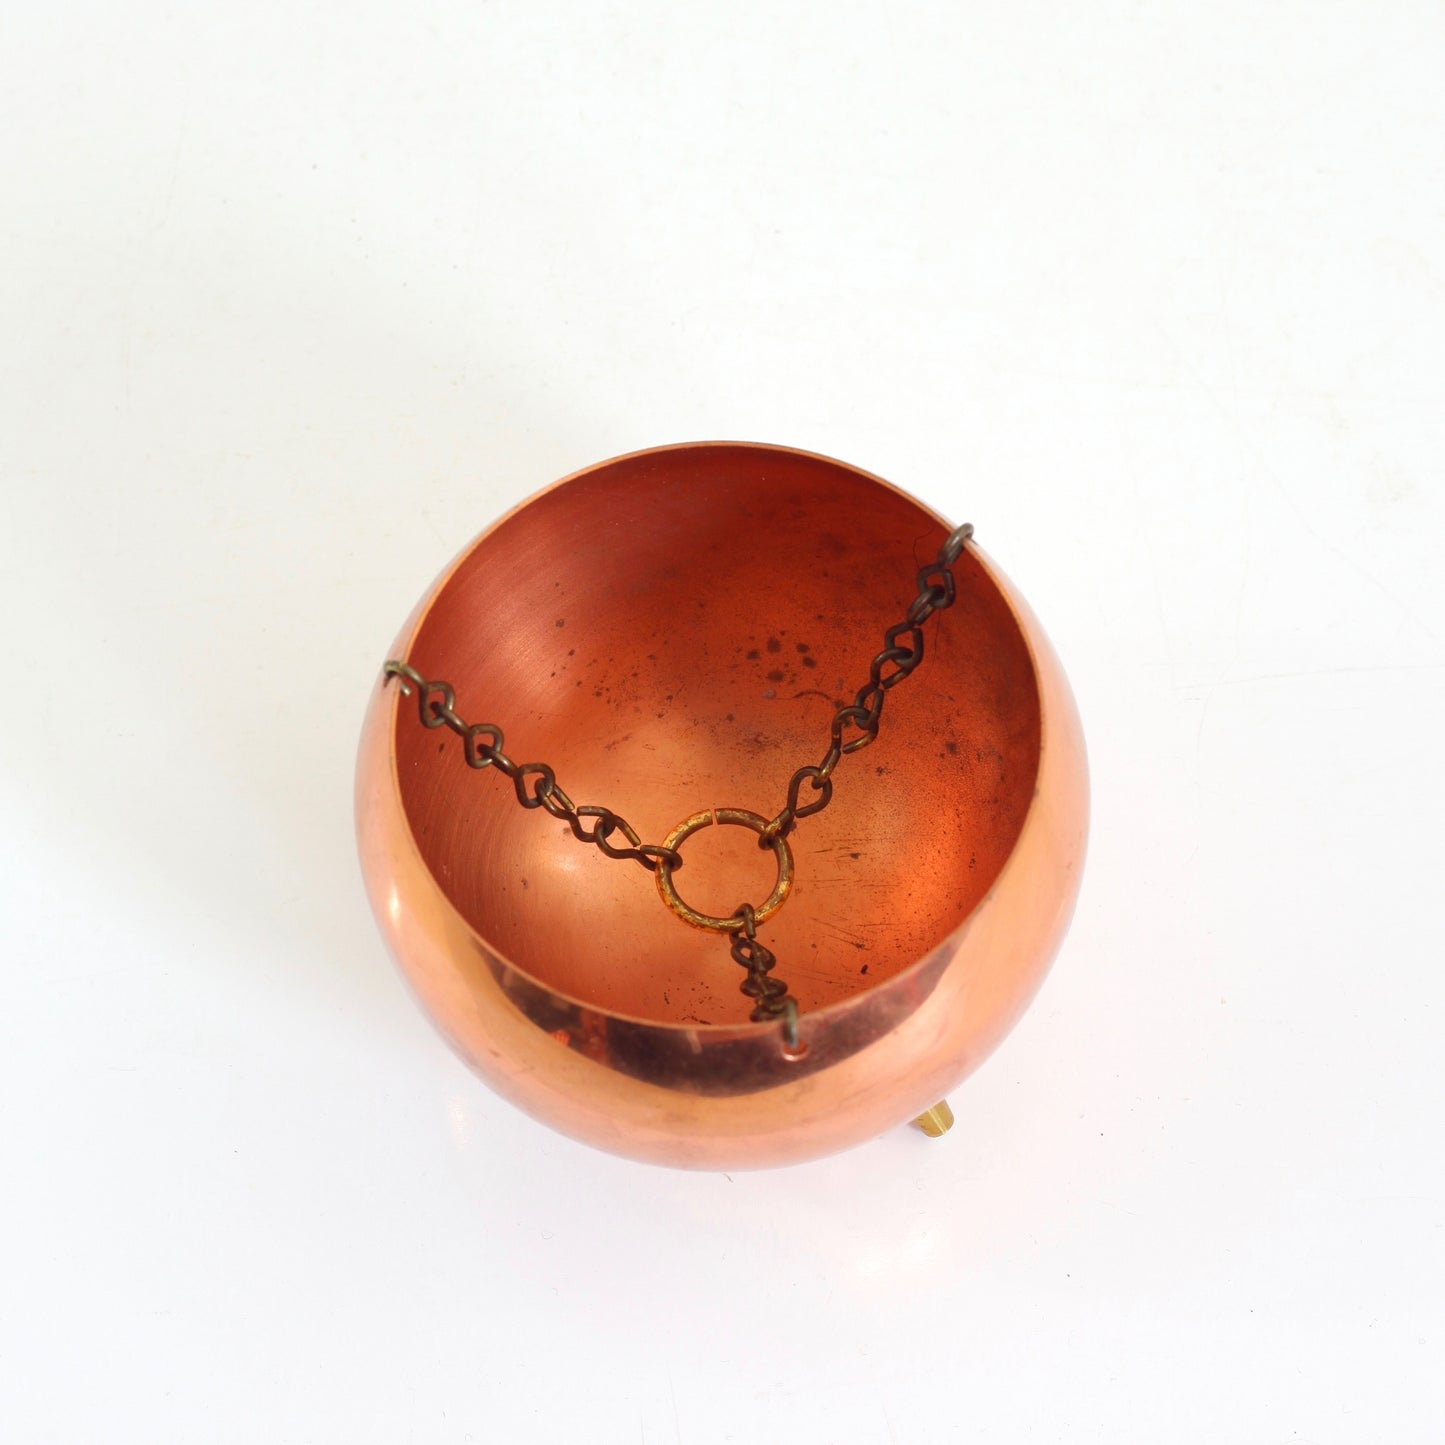 SOLD - Vintage Footed Hanging Copper Planter by Coppercraft Guild